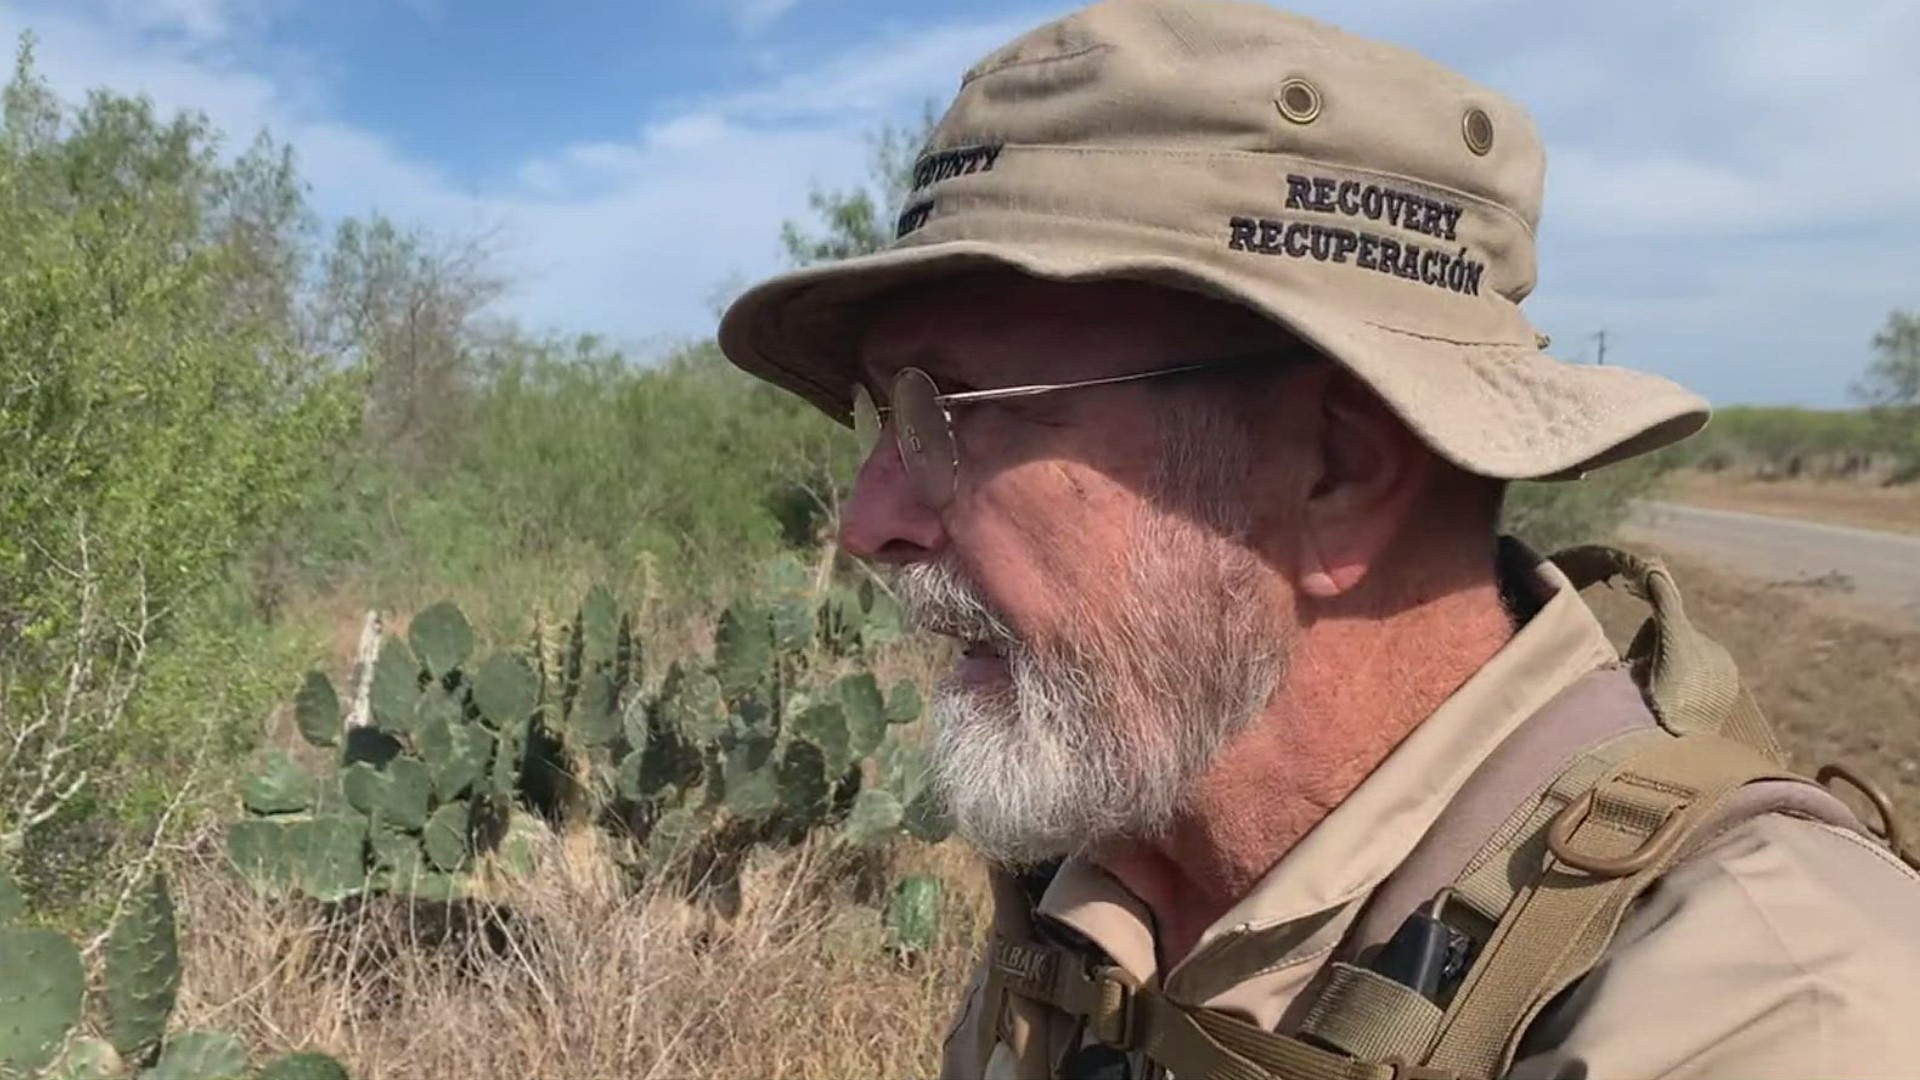 3NEWS searched along with Don White as he searched for the remains of a migrant who is presumed to have died during a human-smuggling attempt in 2022.